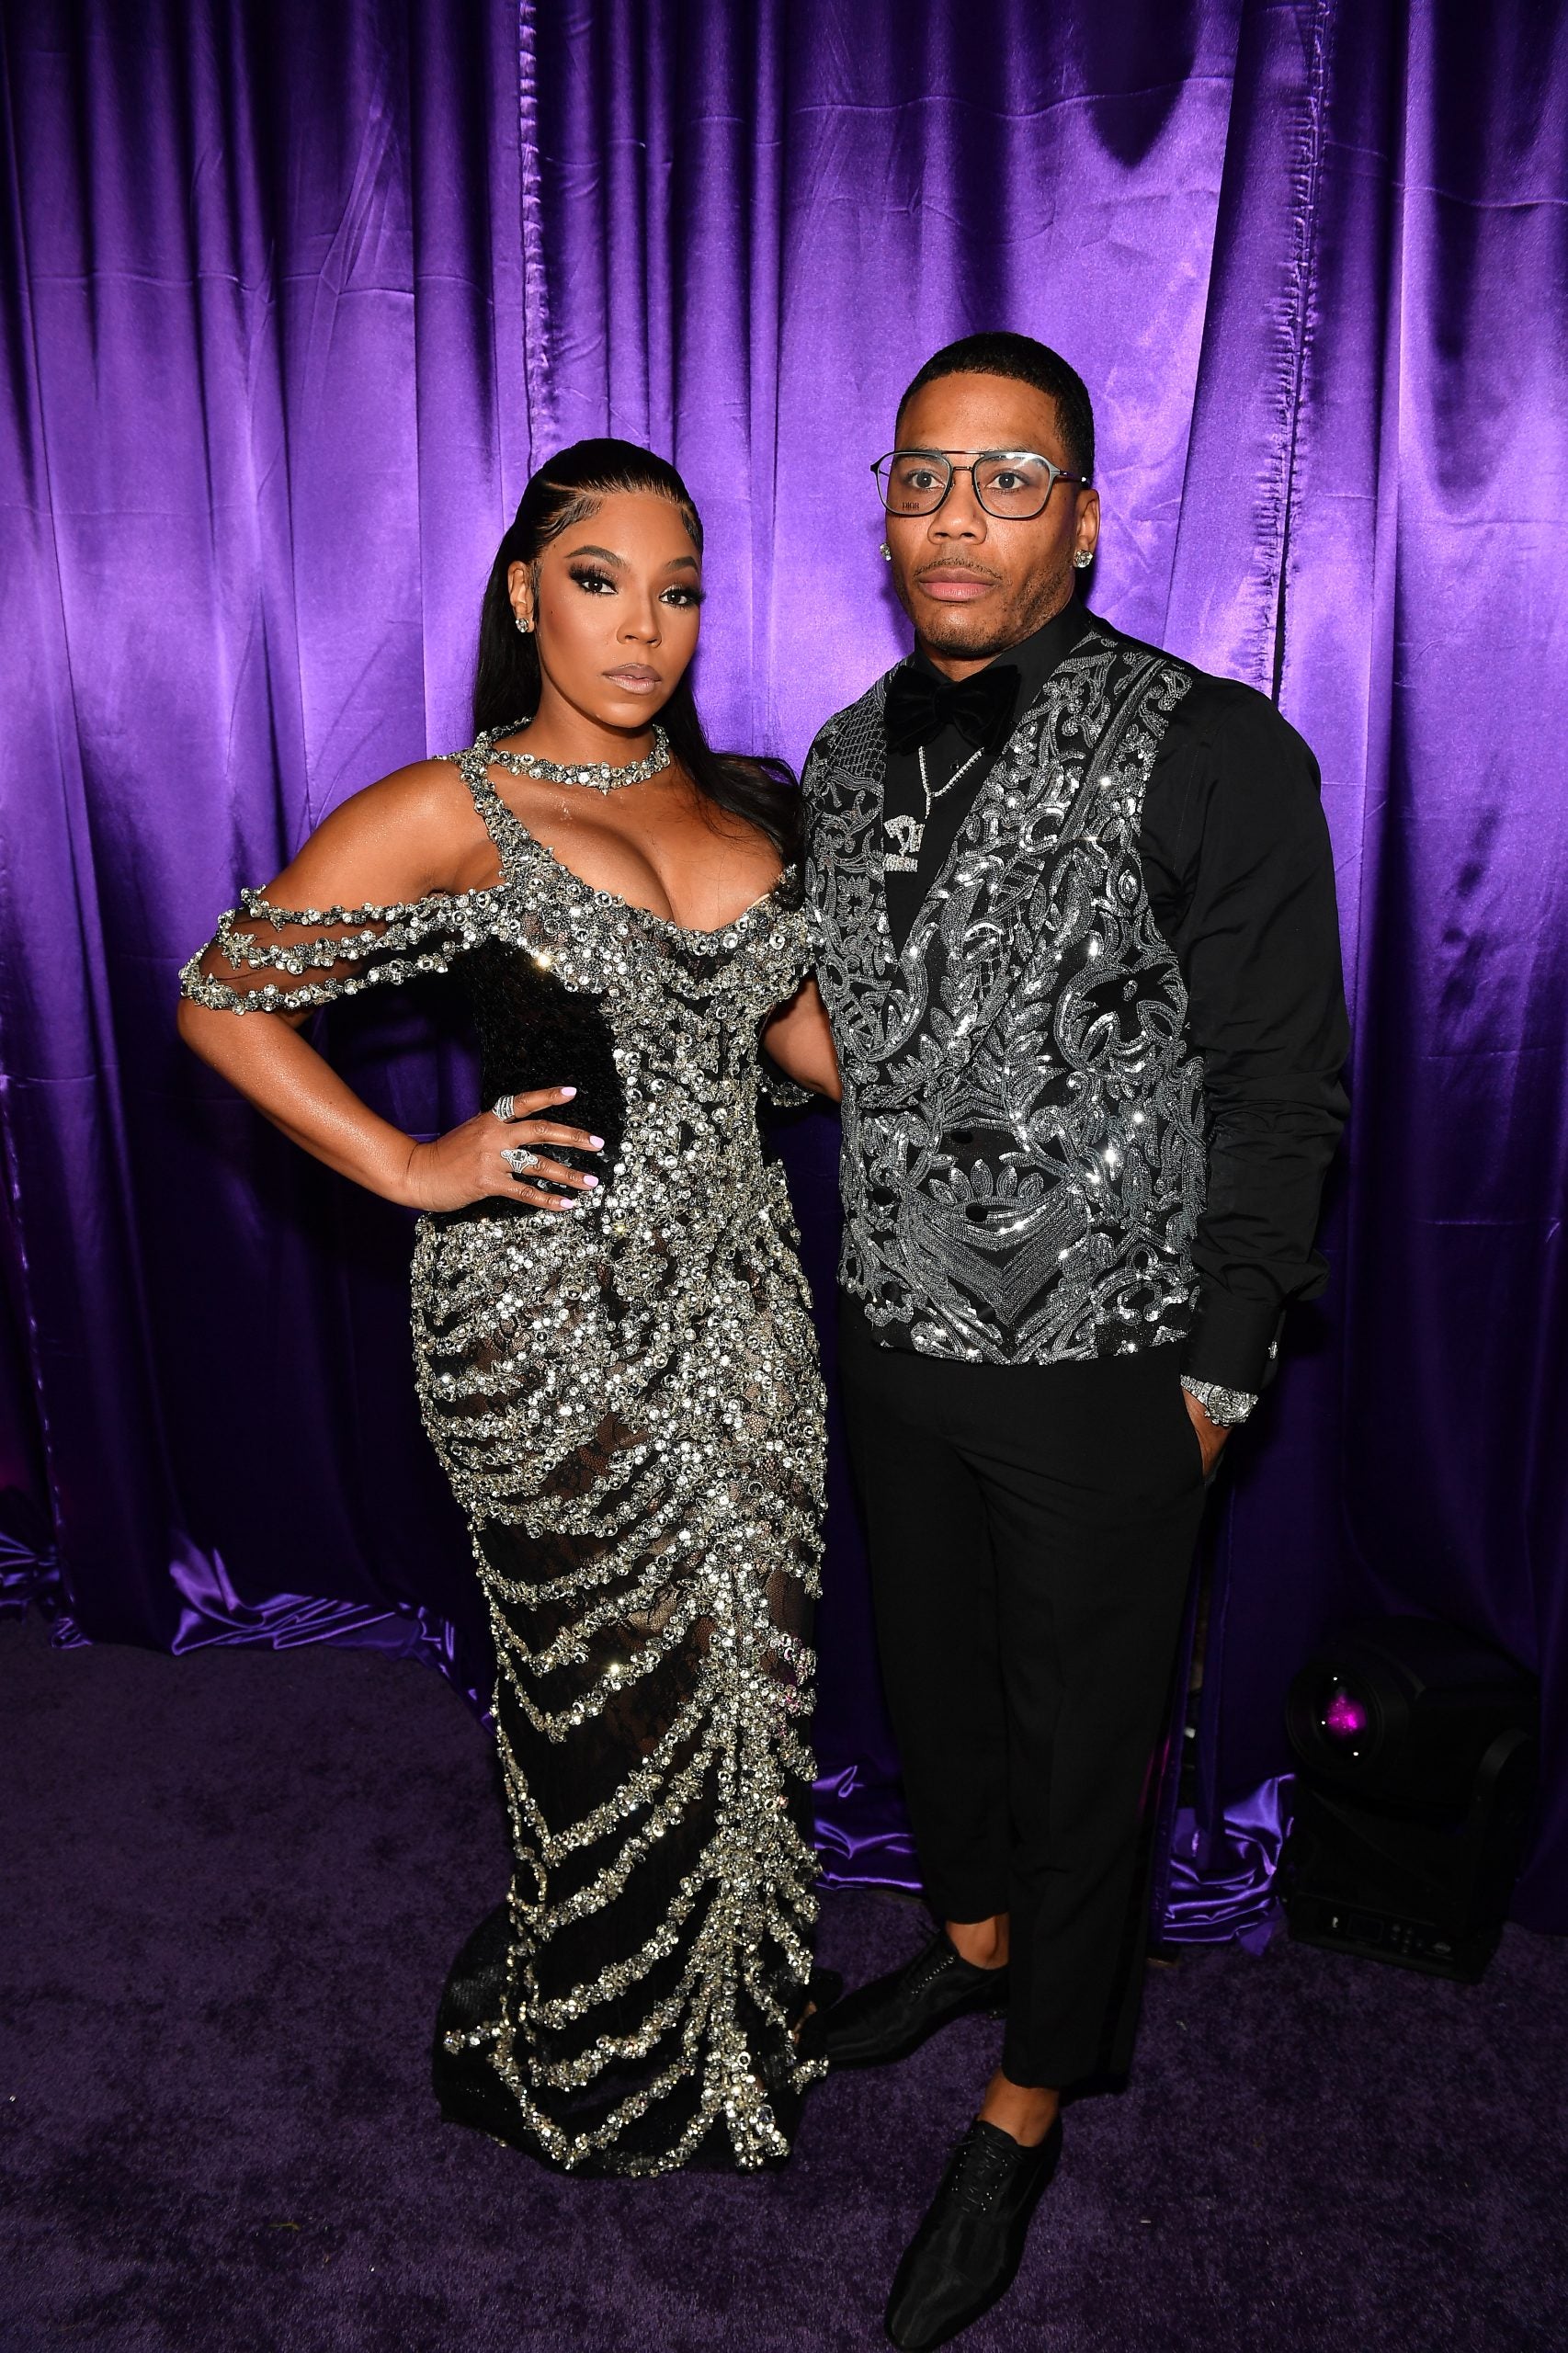 A Reunited Ashanti And Nelly Step Out For Date Night At Star-Studded Black-Tie Ball In Atlanta